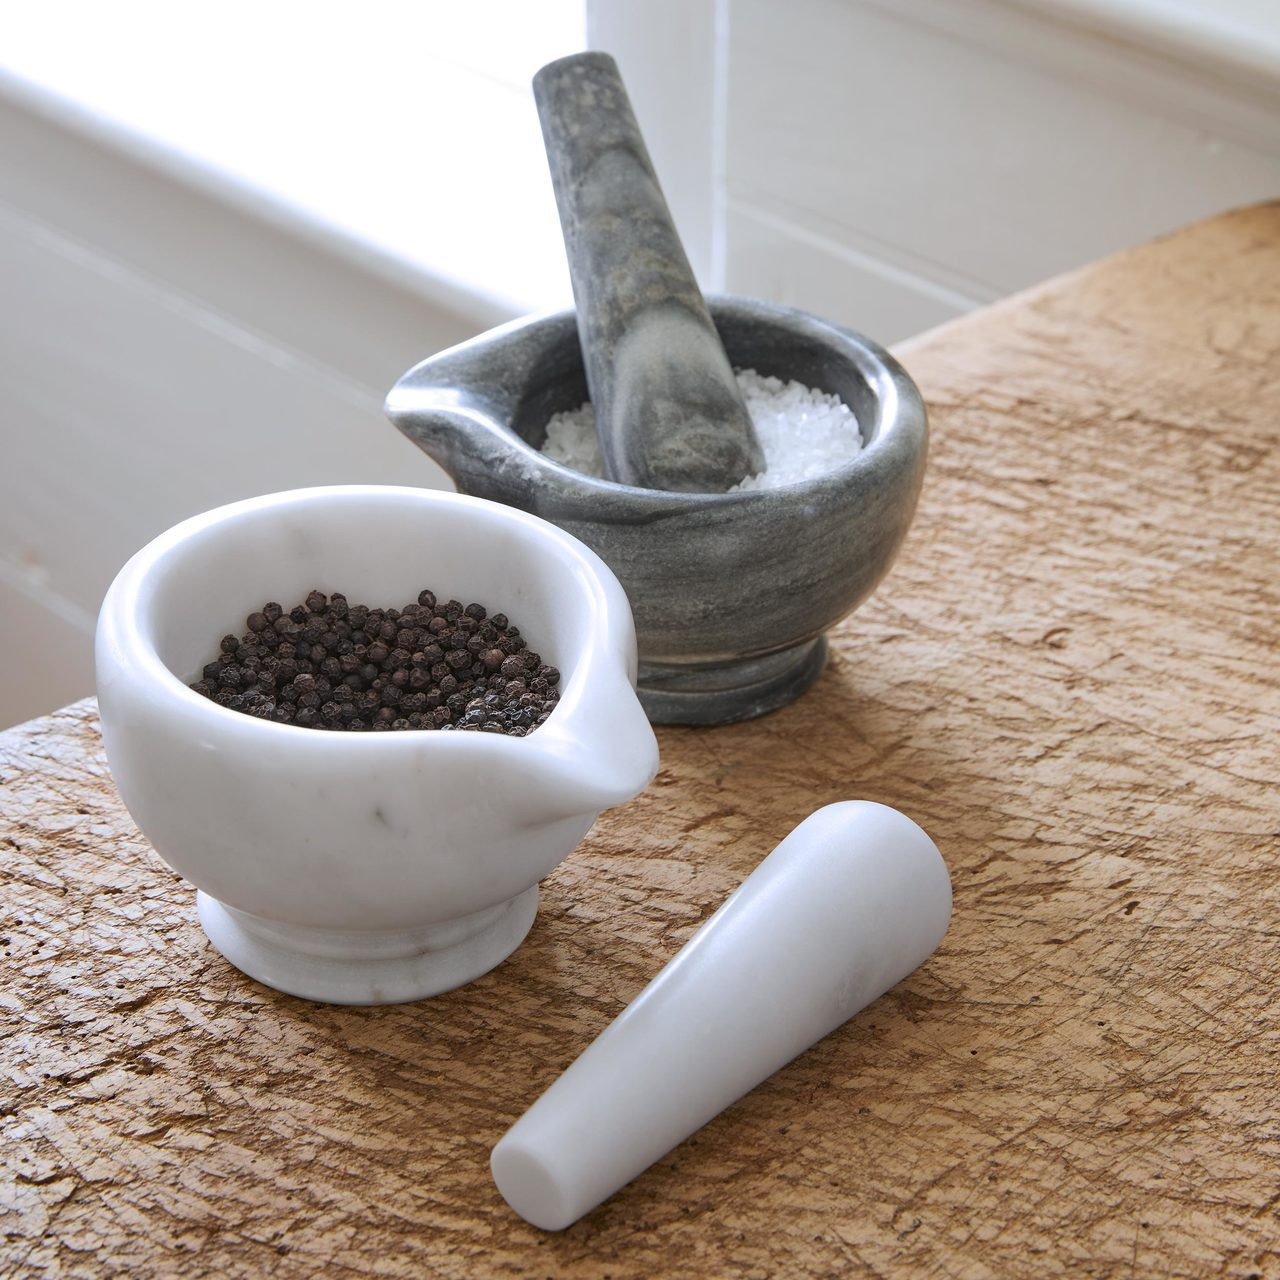 https://cdn10.bigcommerce.com/s-6c0hc1/products/583/images/2388/marble_mortarpestle_small_life__48724.1522345401.1280.1280.jpg?c=2